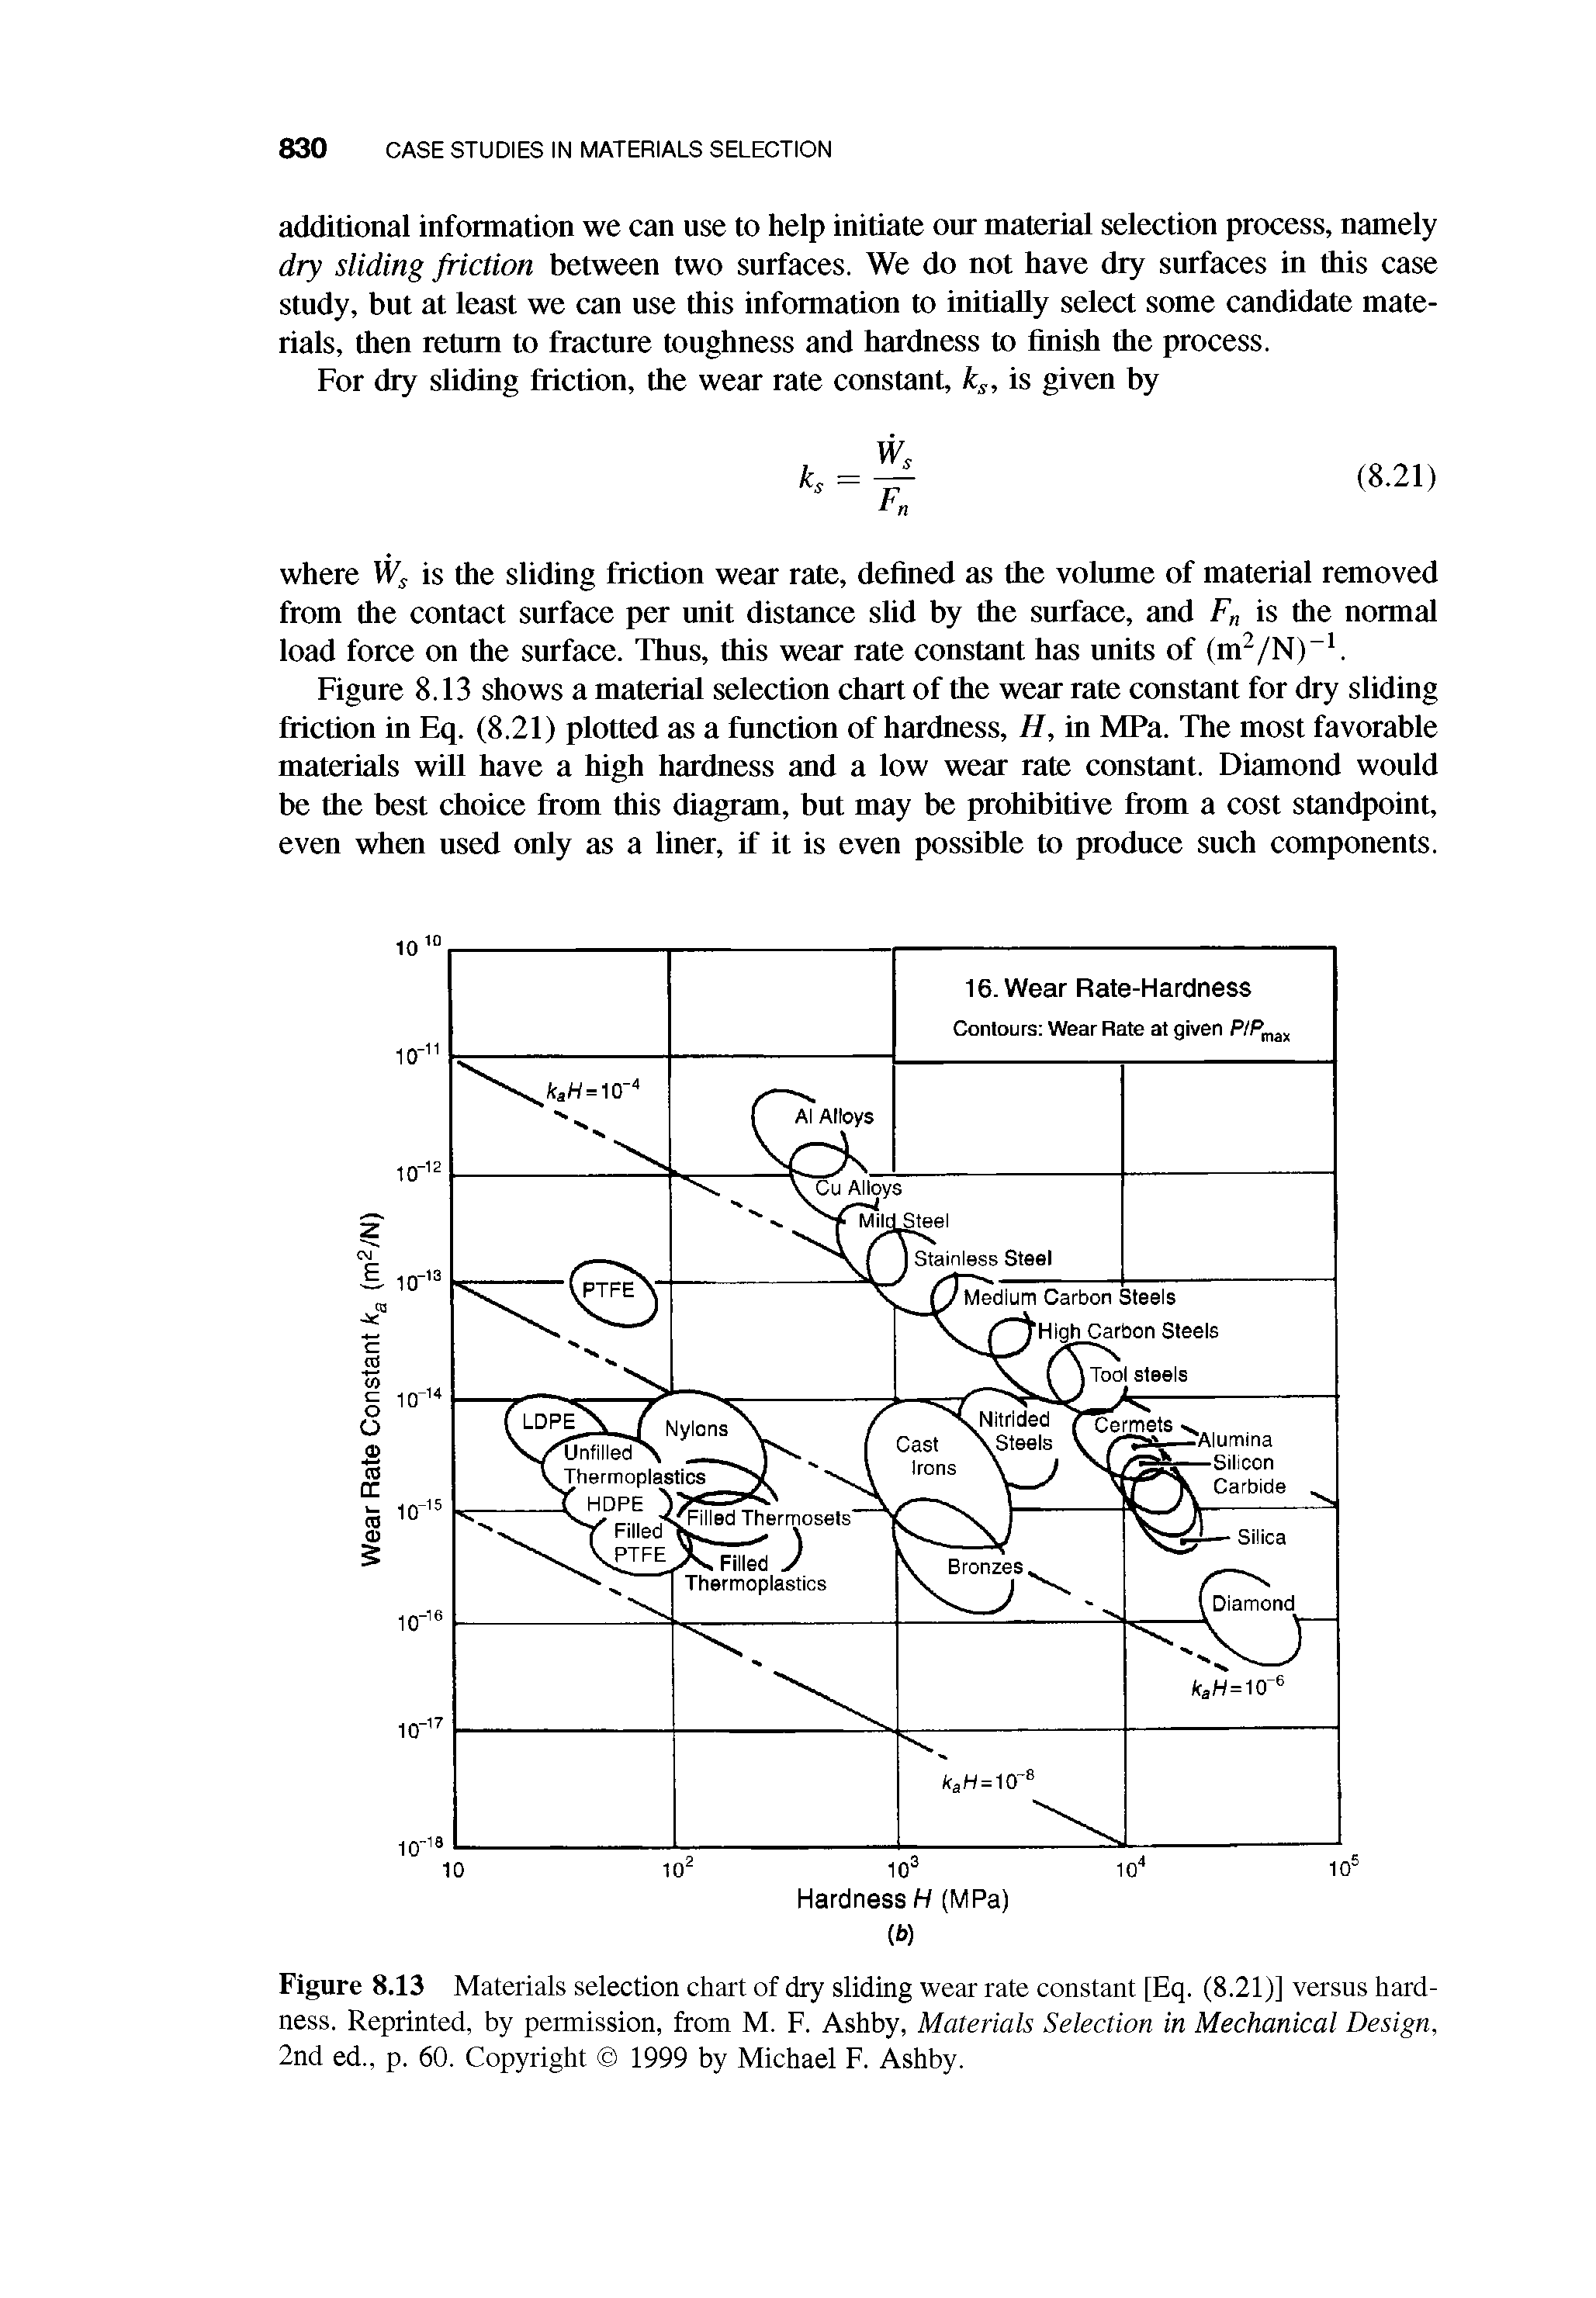 Figure 8.13 Materials selection chart of dry sliding wear rate constant [Eq. (8.21)] versus hardness. Reprinted, by permission, from M. F. Ashby, Materials Selection in Mechanical Design, 2nd ed., p. 60. Copyright 1999 by Michael F. Ashby.